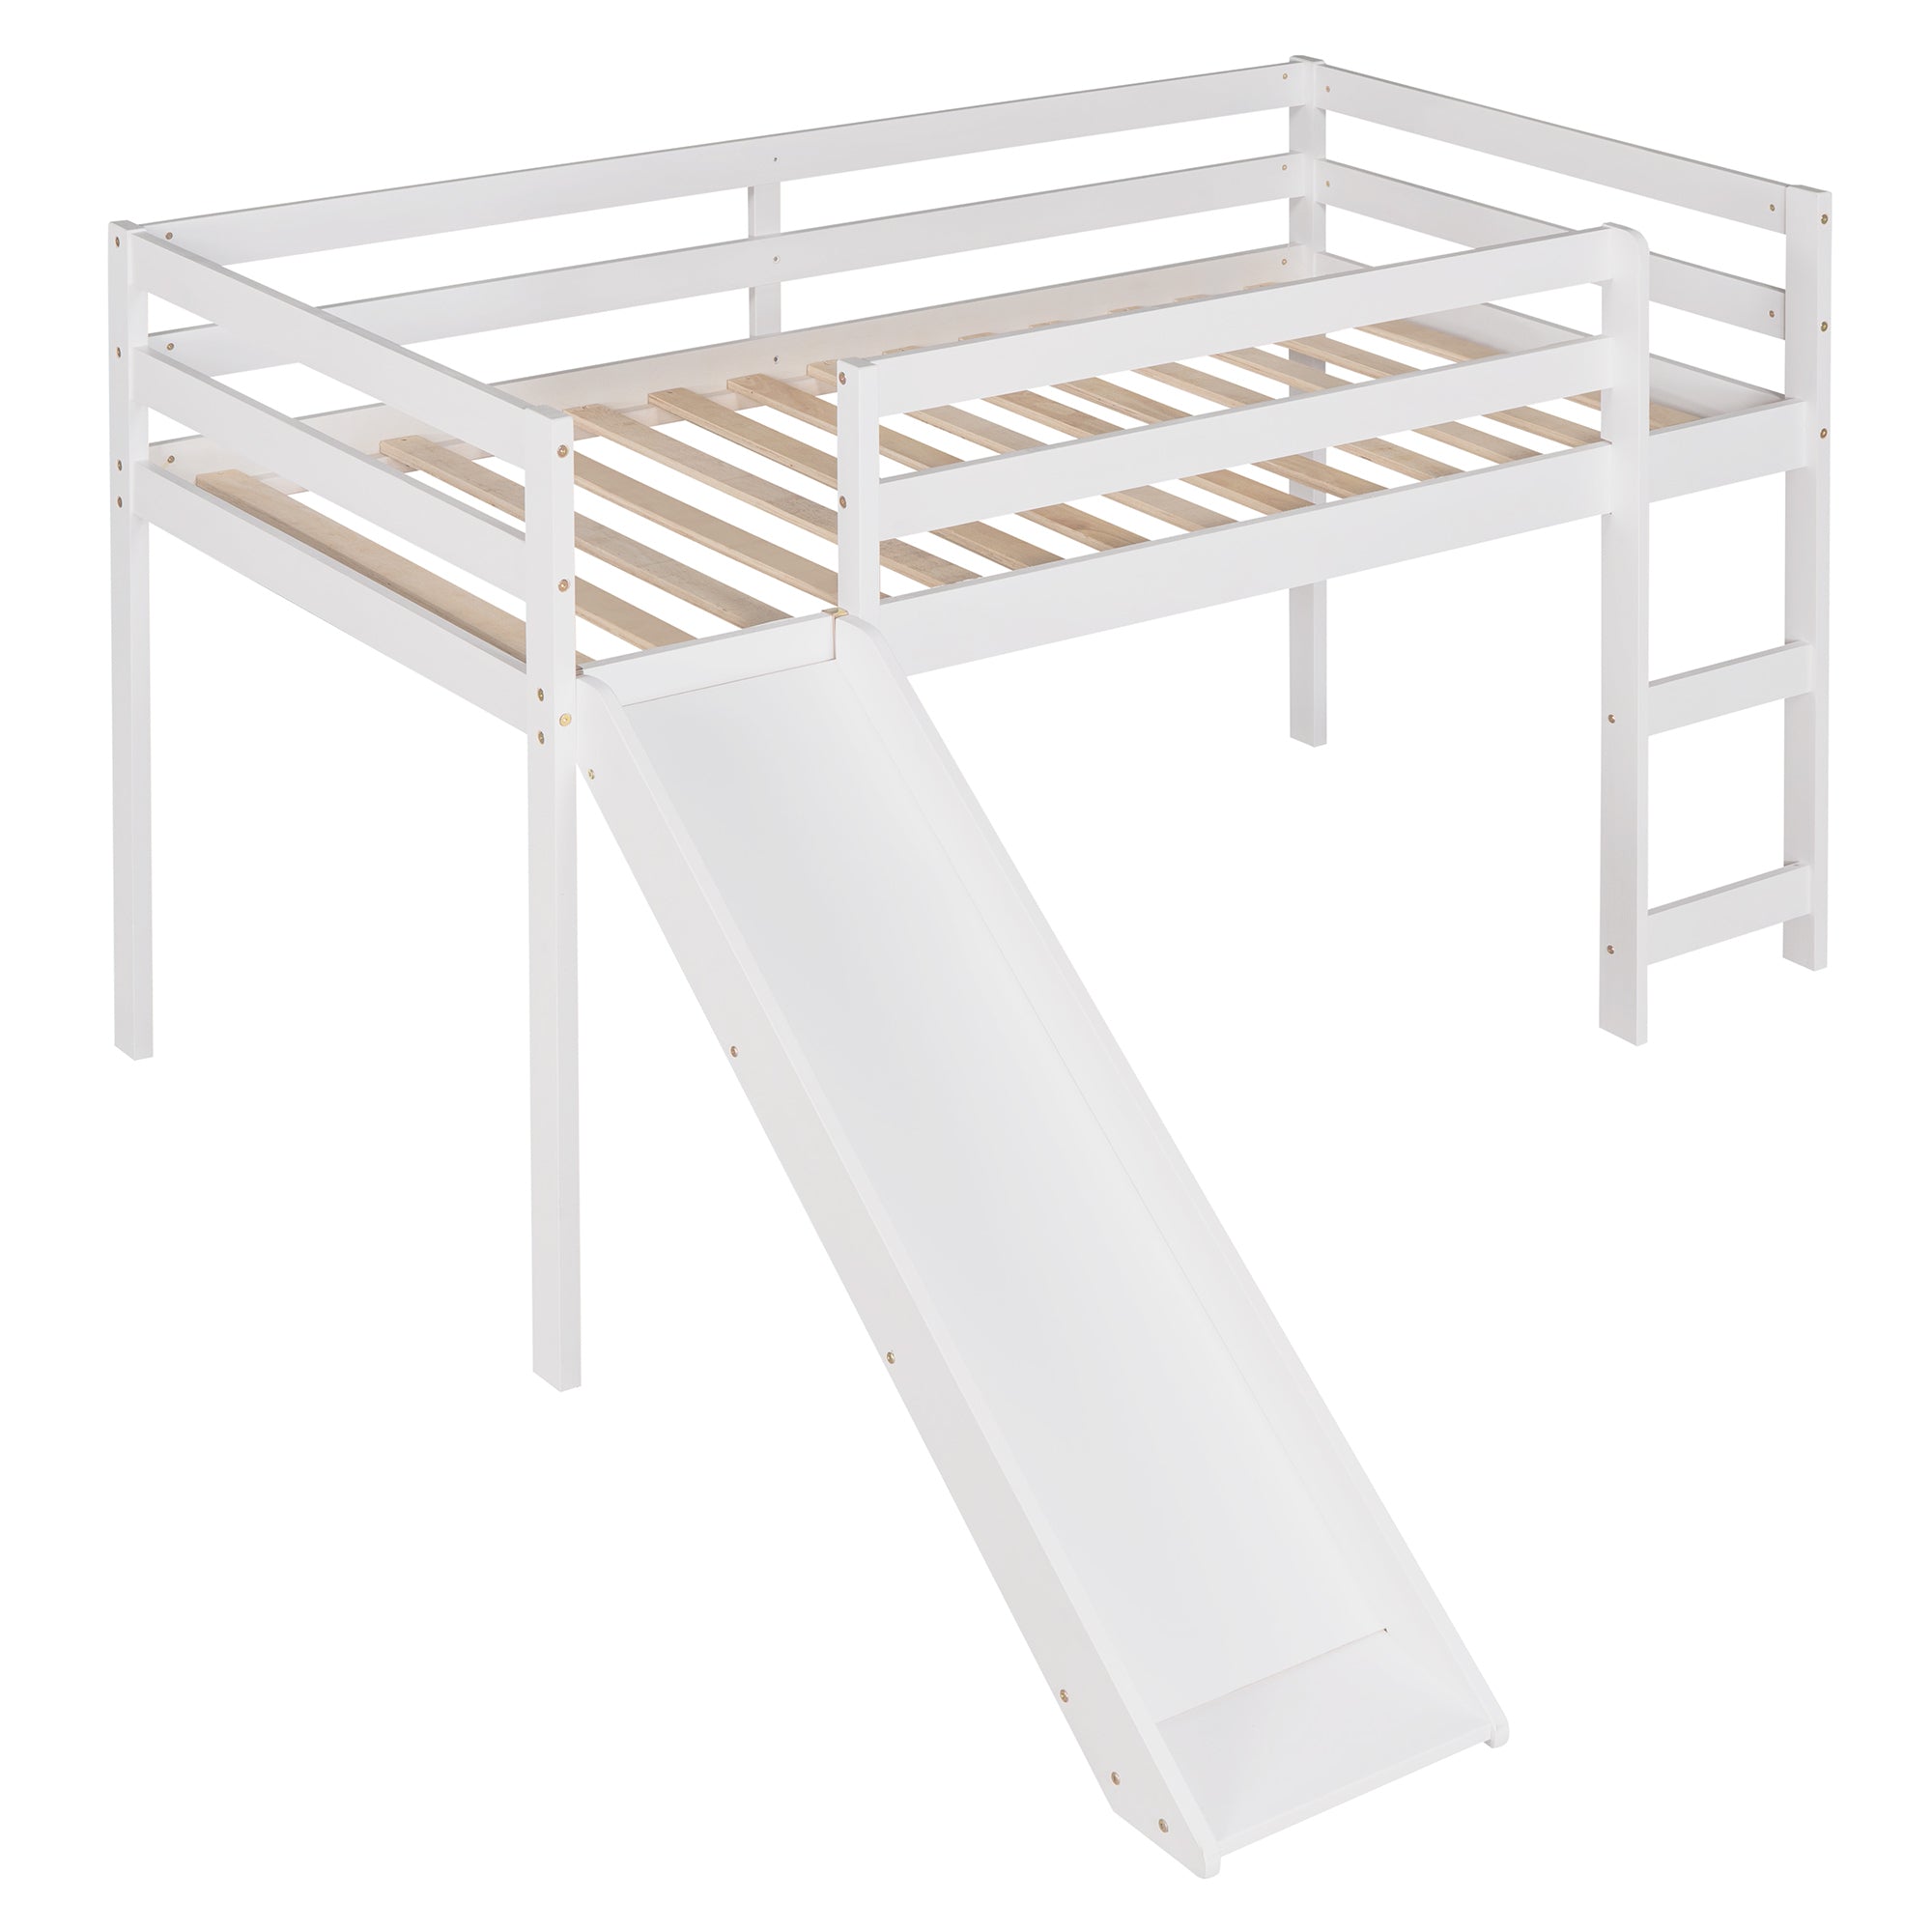 Loft Bed with Slide, Multifunctional Design, Twin white-solid wood